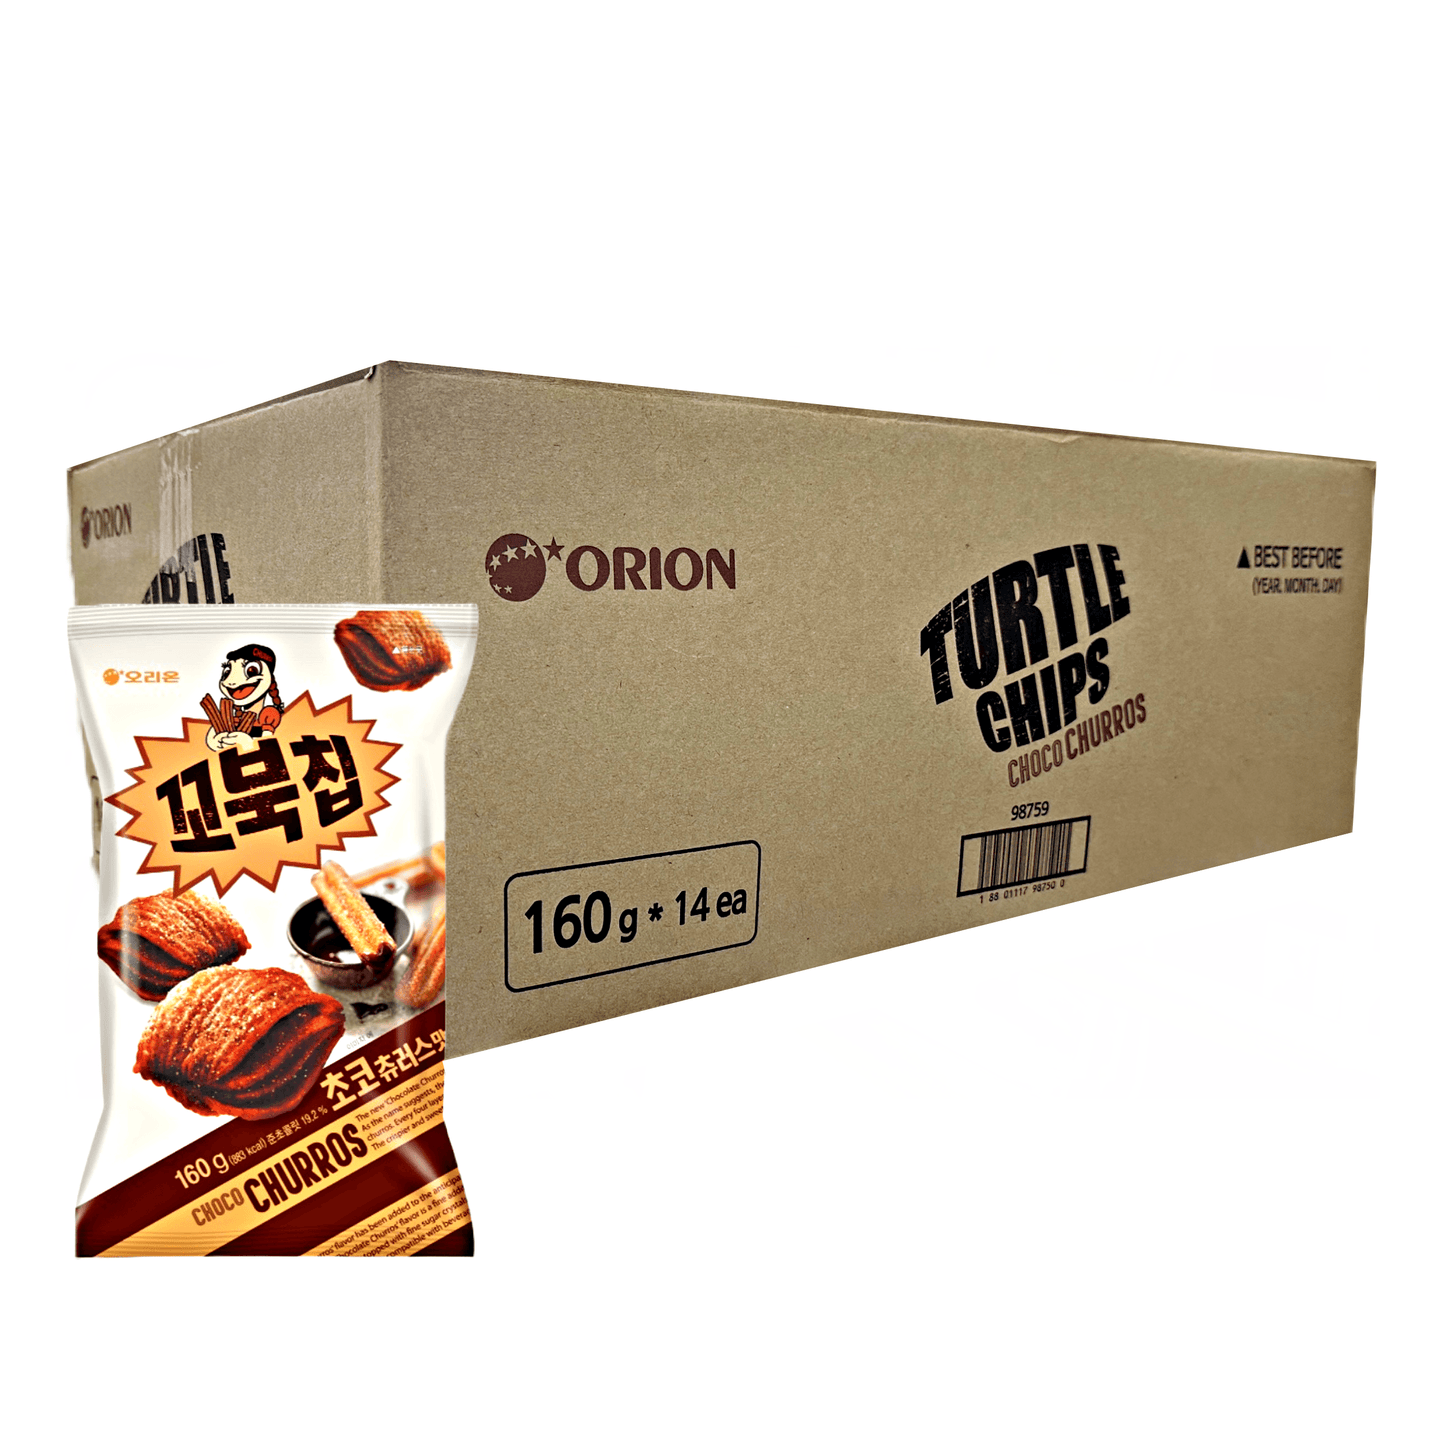 Orion Turtle Chips Choco Churros 14x160g - The Snacks Box - Asian Snacks Store - The Snacks Box - Korean Snack - Japanese Snack